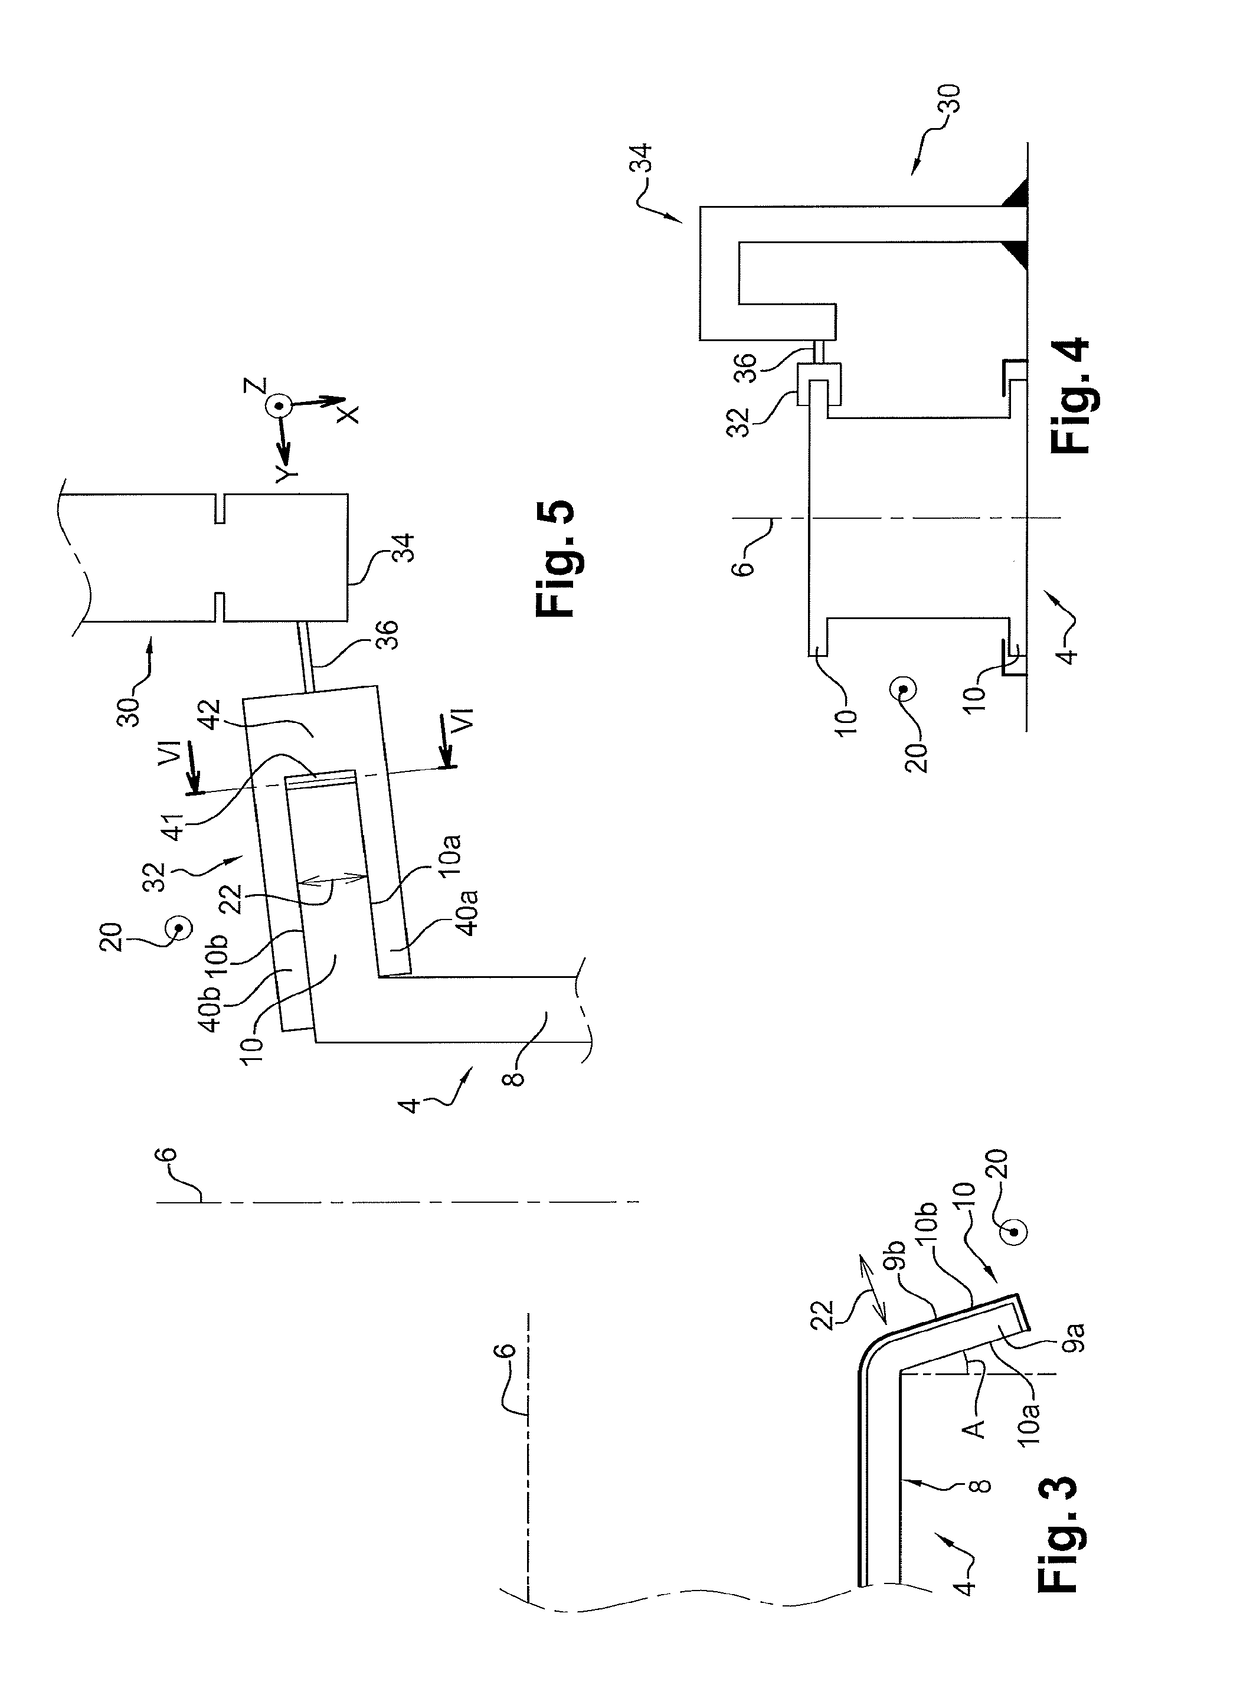 Method for machining an attachment flange of an aircraft turbomachine case